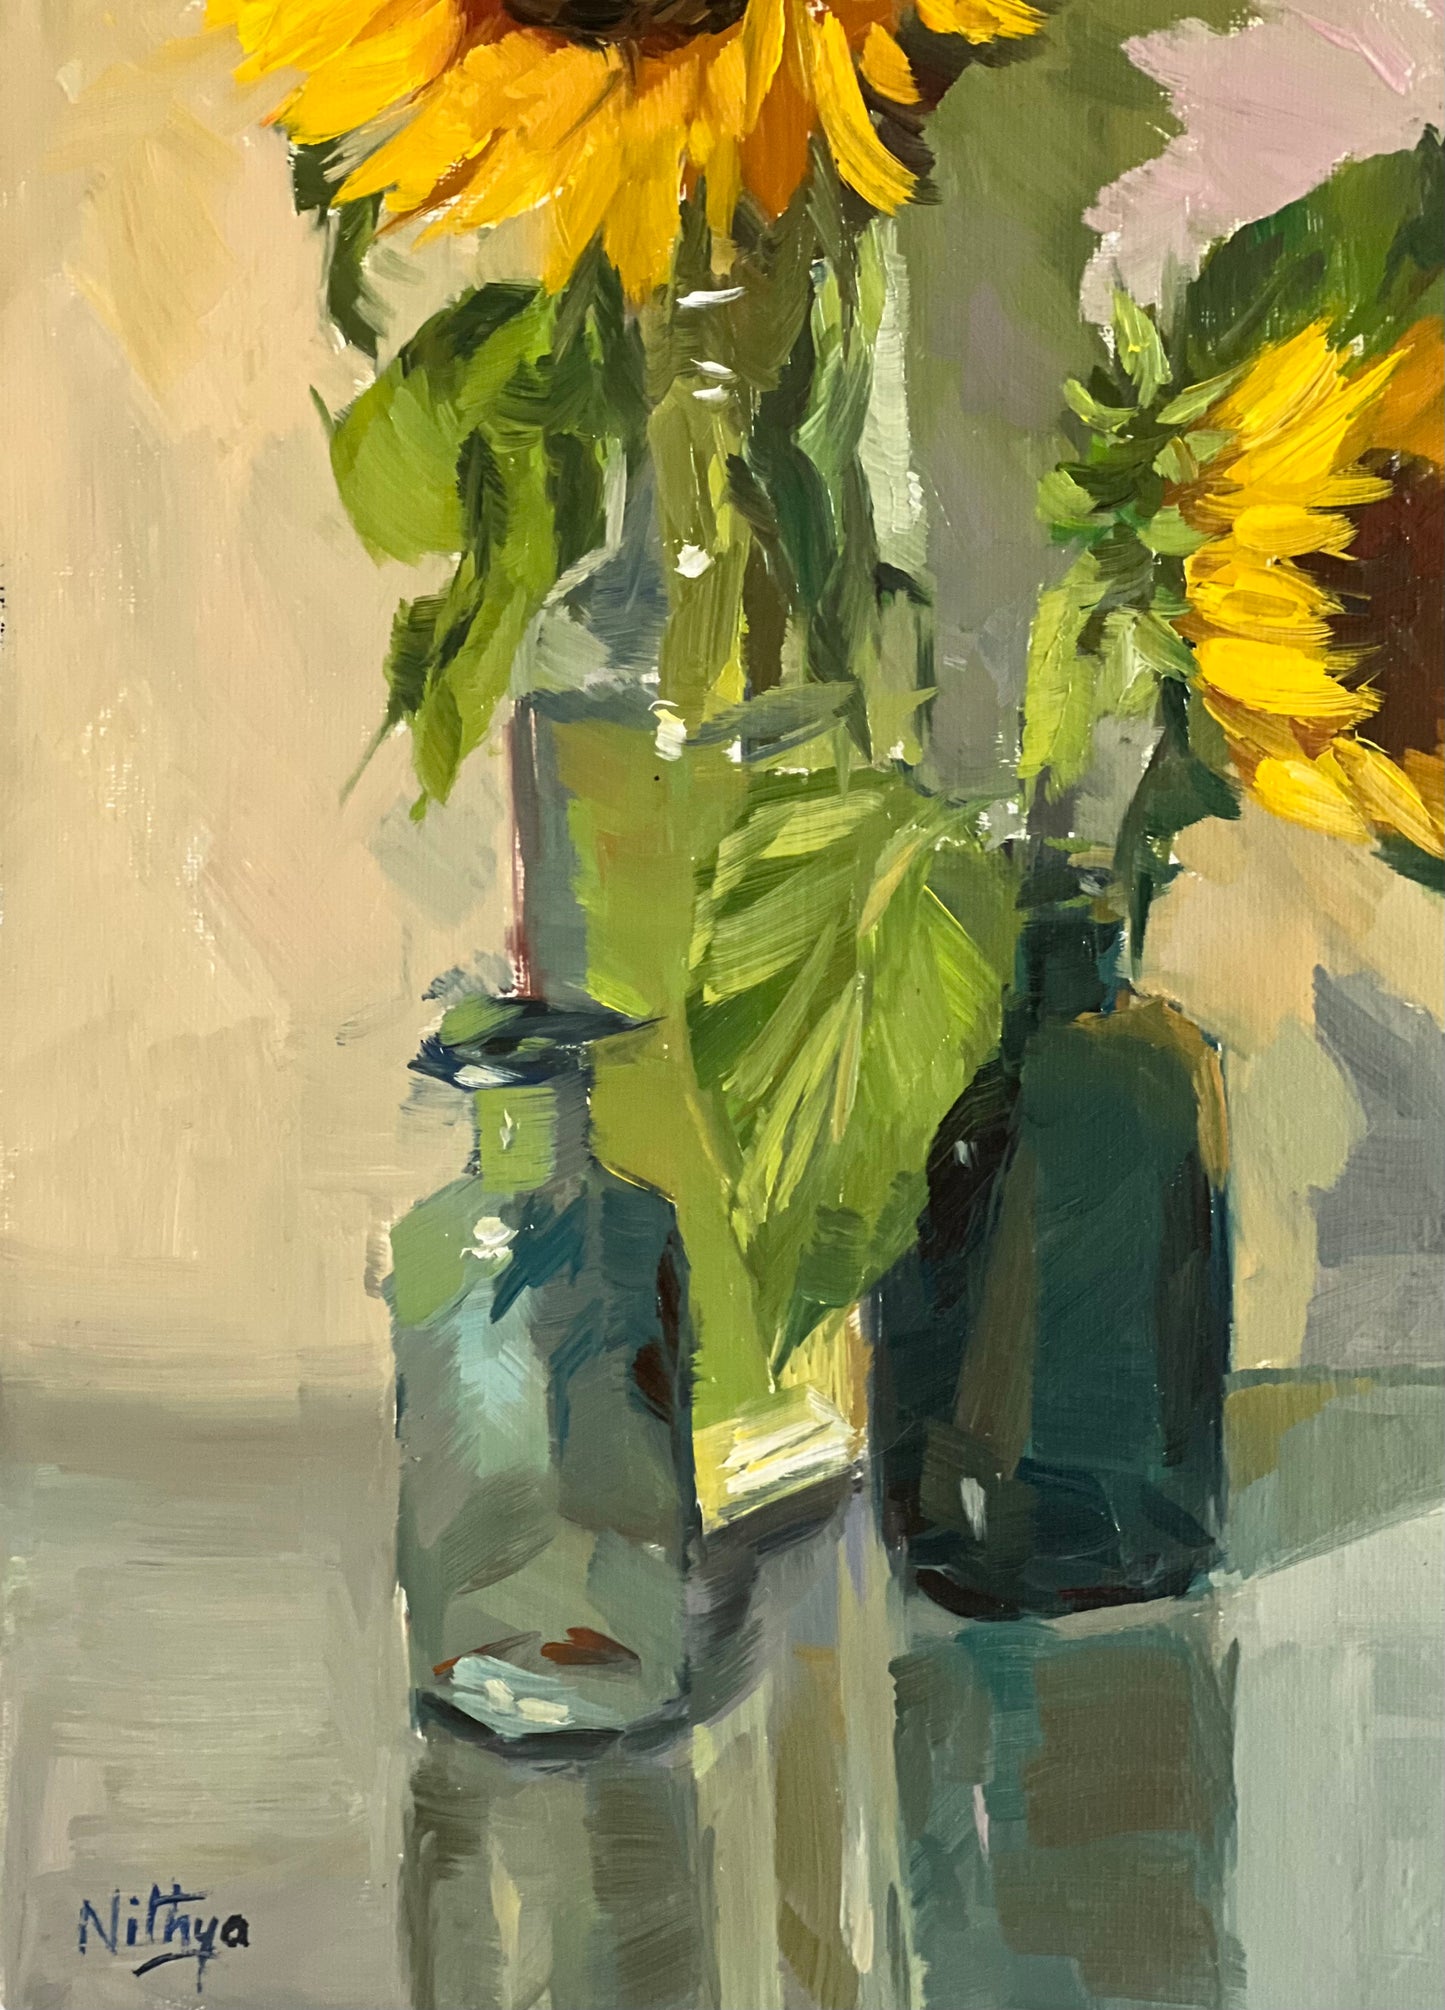 Sunflower Series 4 - Original Stilllife Painting, 8 by 12 inches